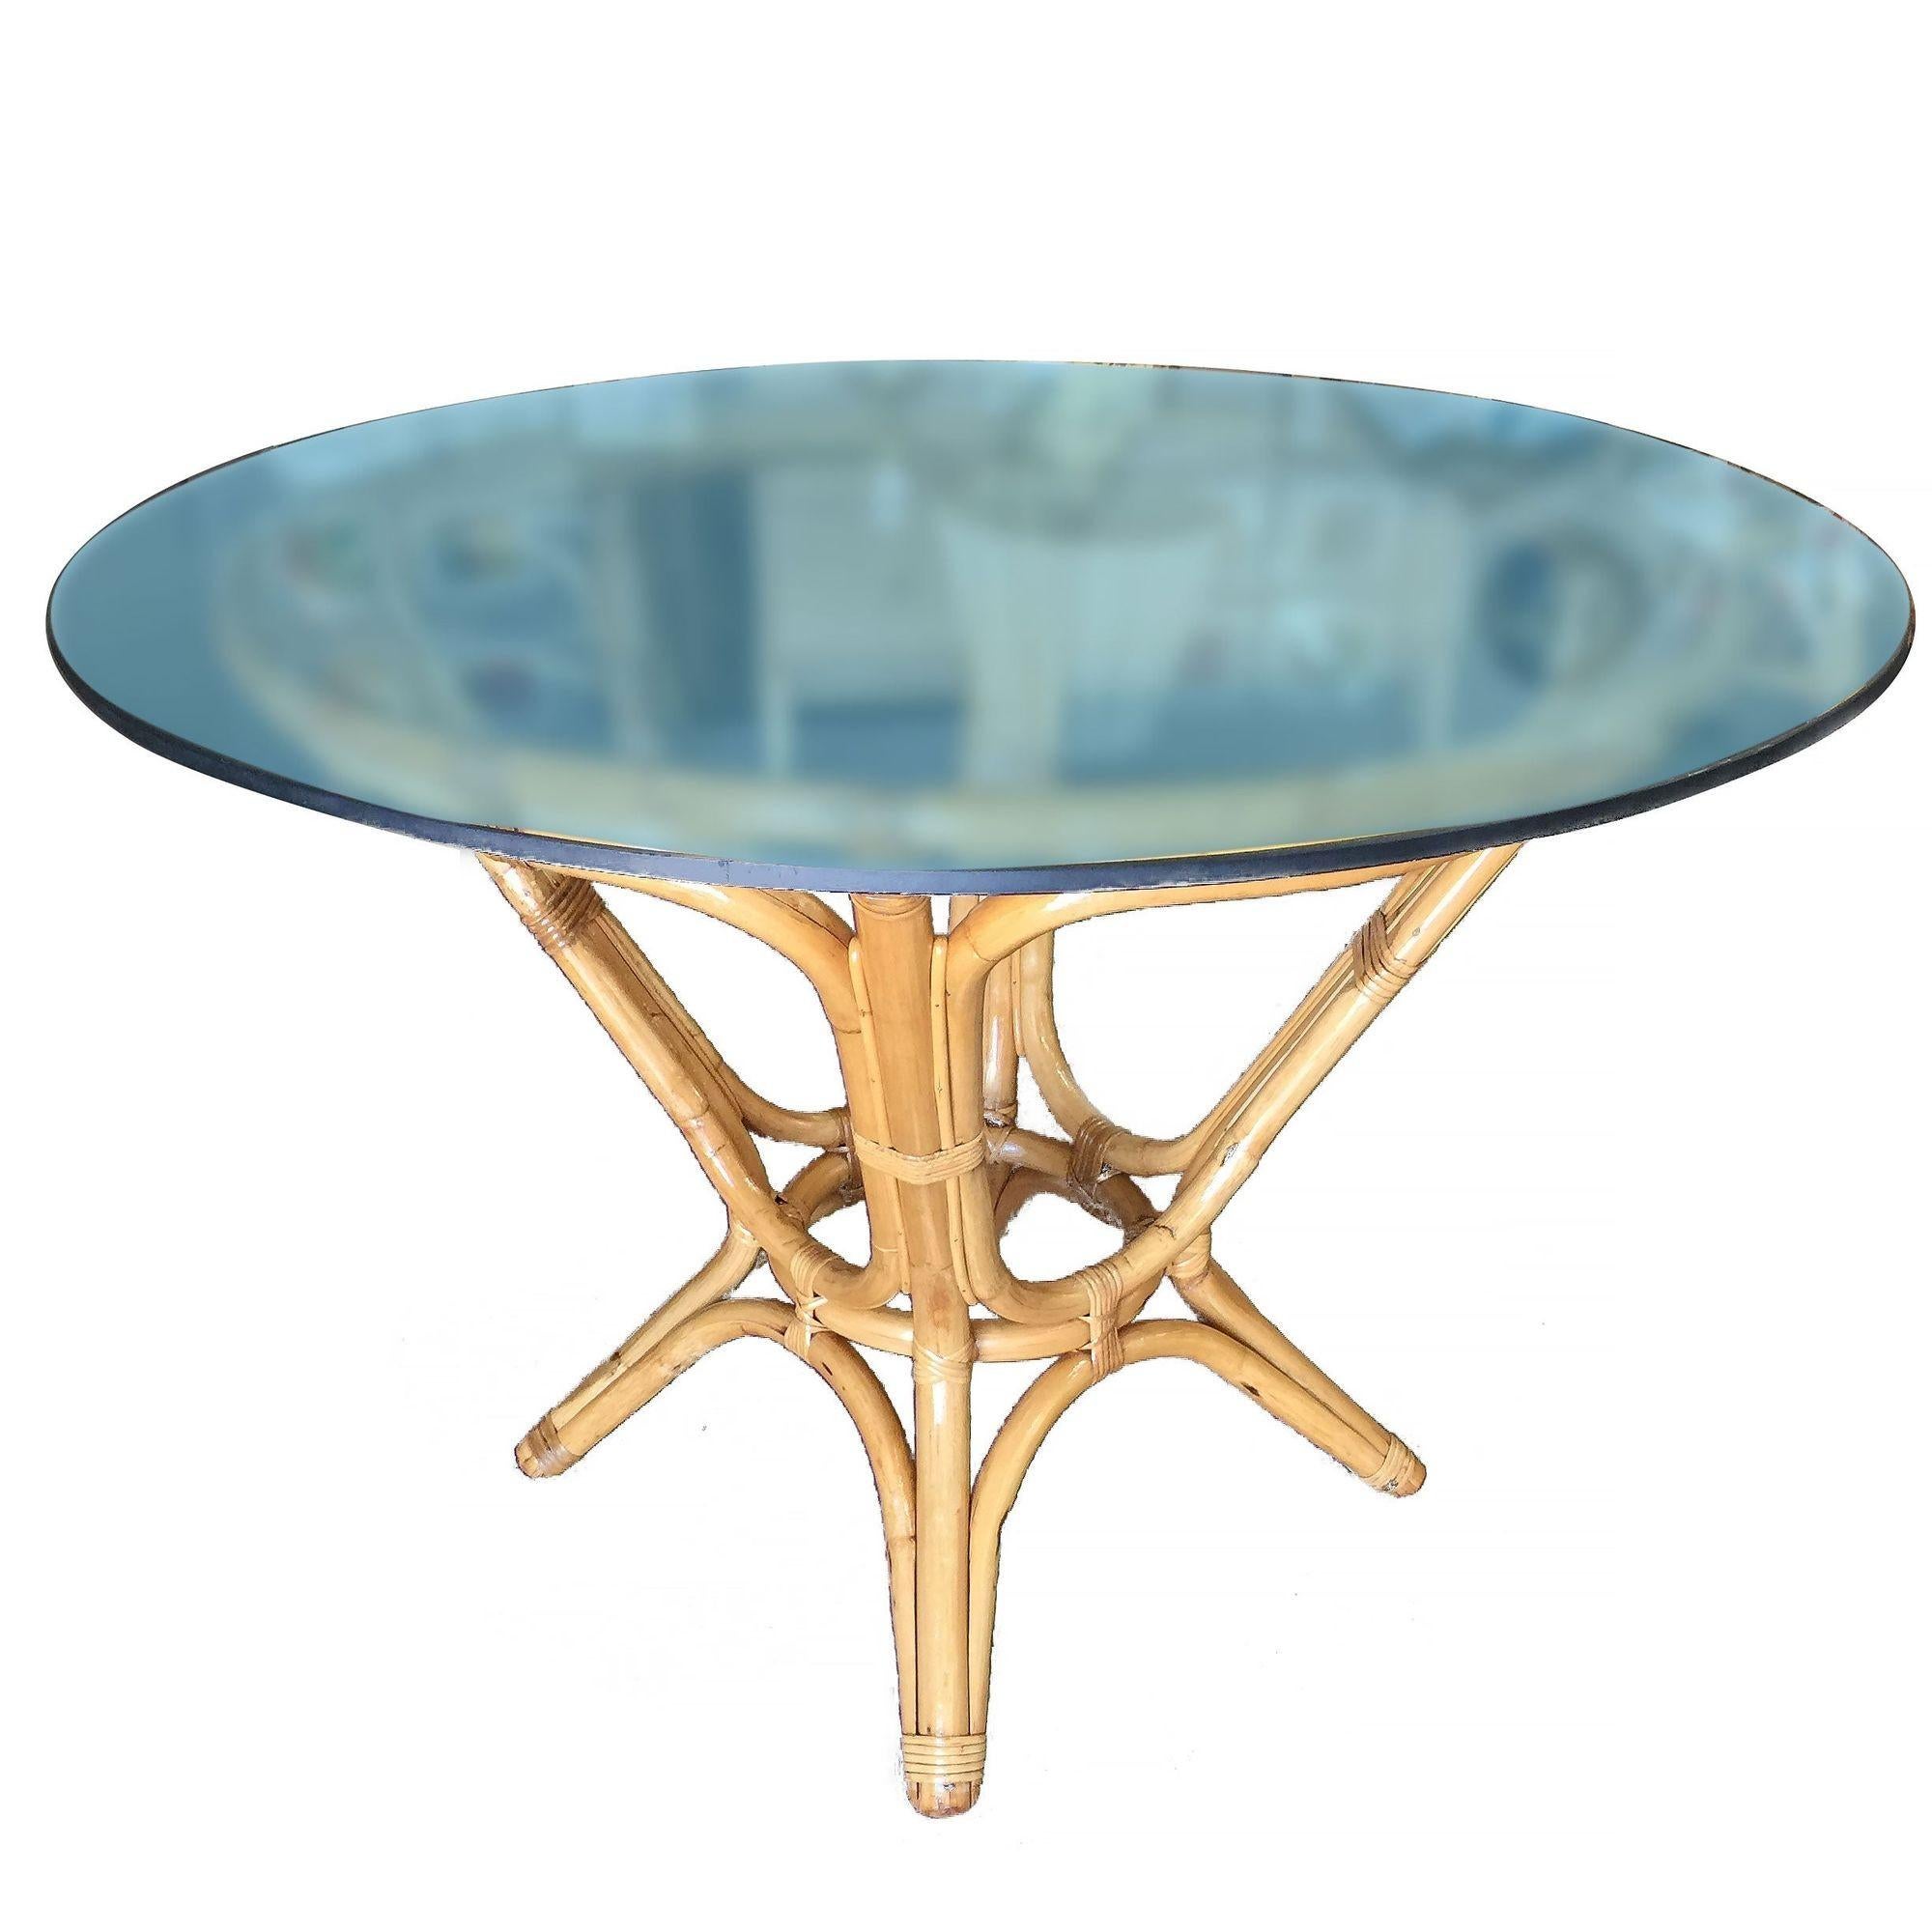 Elegant midcentury dining table features a sculptural hourglass rattan base with a round glass top. The table can easily accommodate four guests depending on the choice of chairs. Restored to new for you. All rattan, bamboo and wicker furniture has